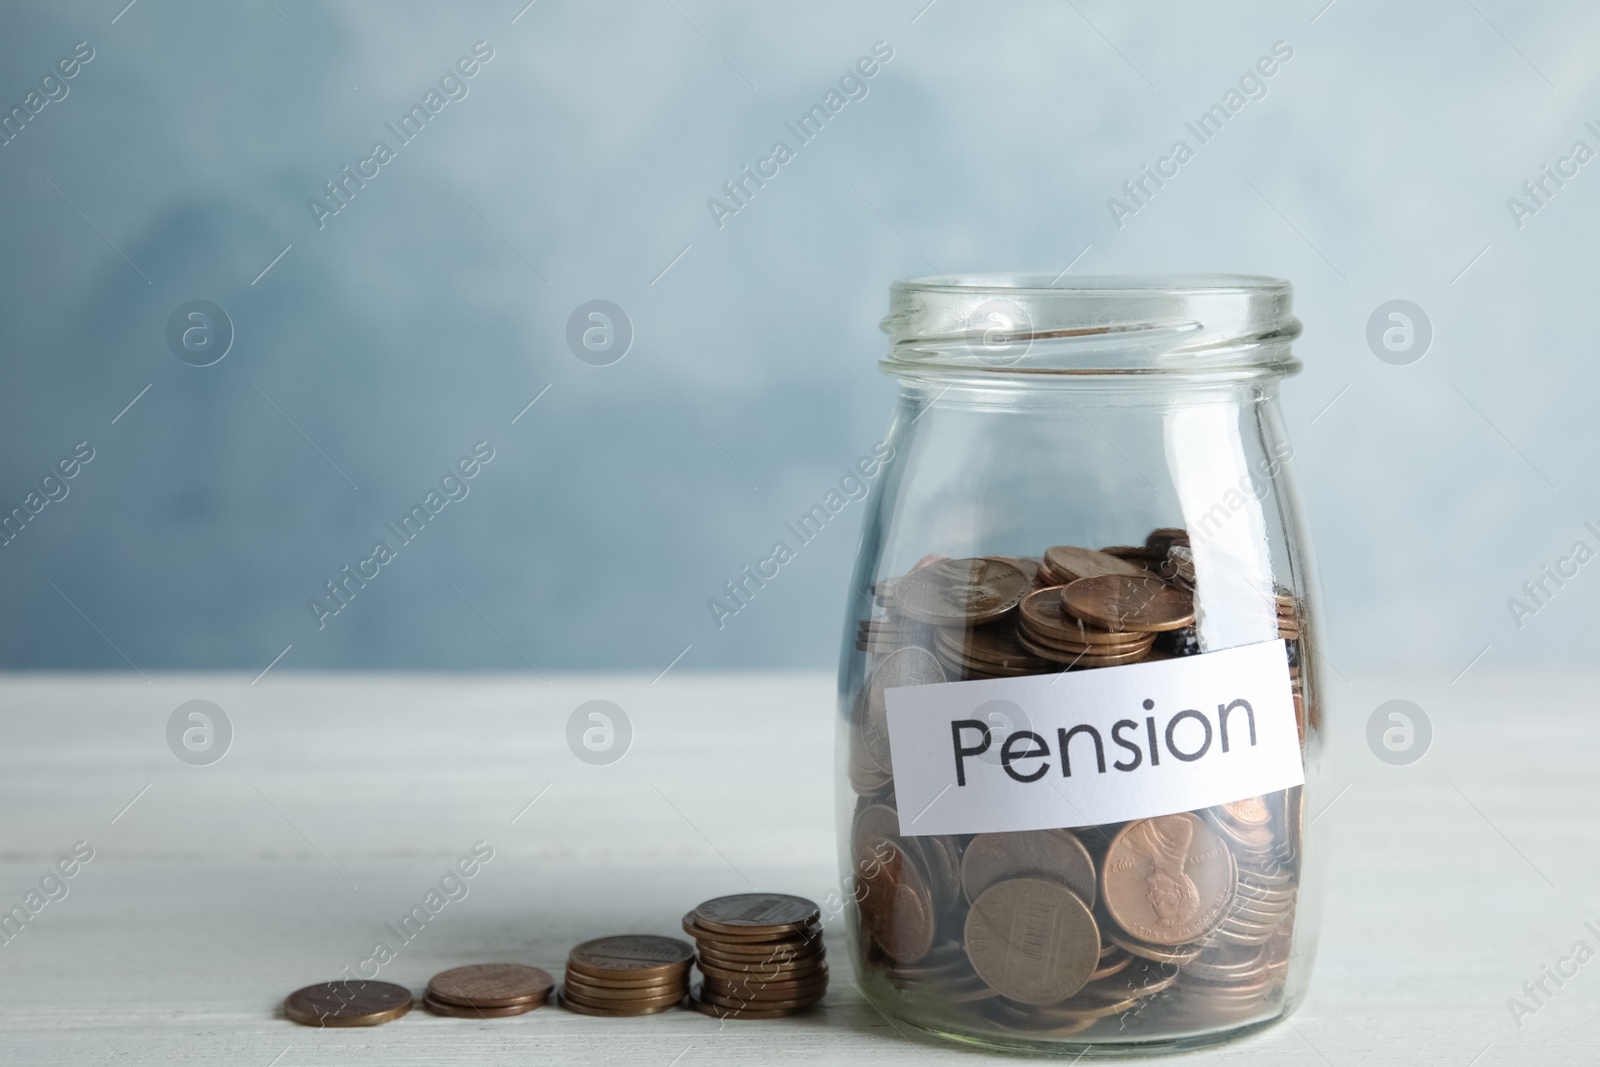 Photo of Glass jar with label PENSION and coins on white table. Space for text